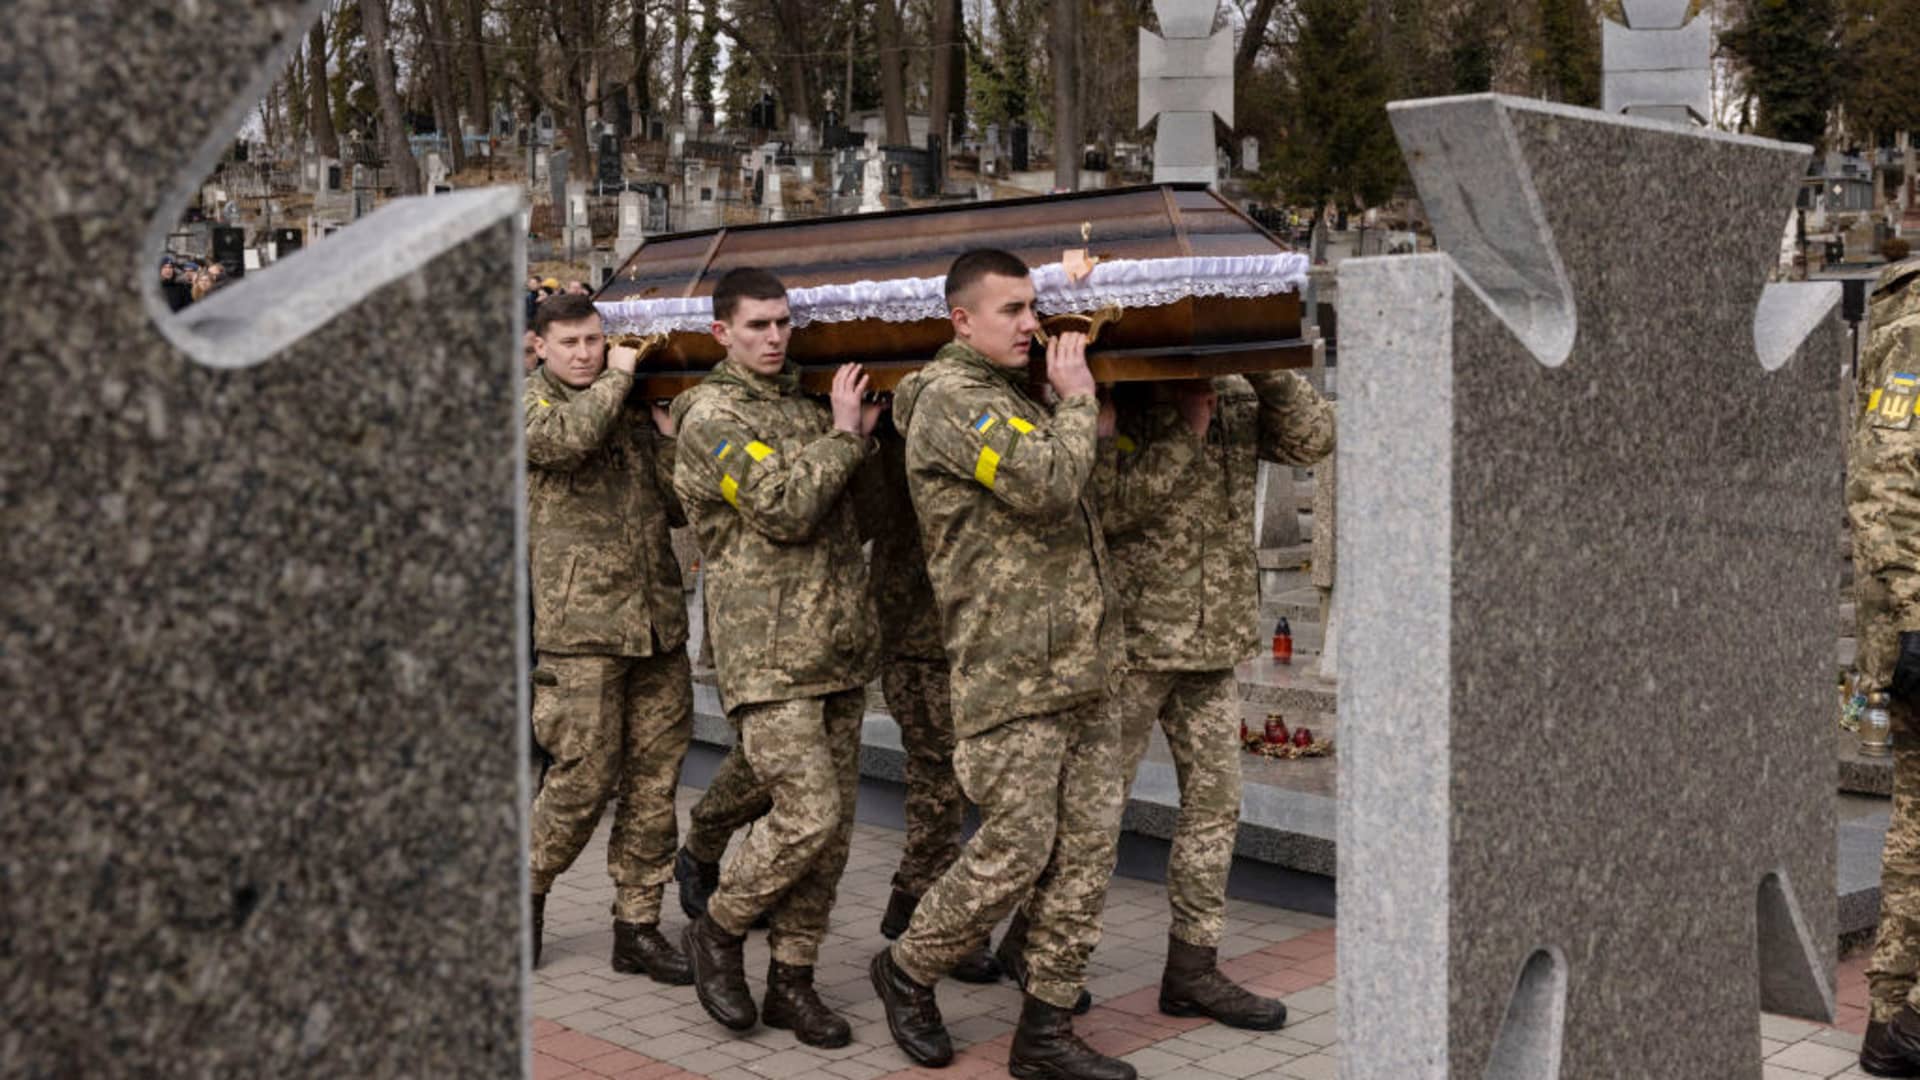 A procession takes place at Lychakiv cemetary during a joint funeral for two soldiers who died in the east of the country during recent fighting, on March 08, 2022 in Lviv, Ukraine.